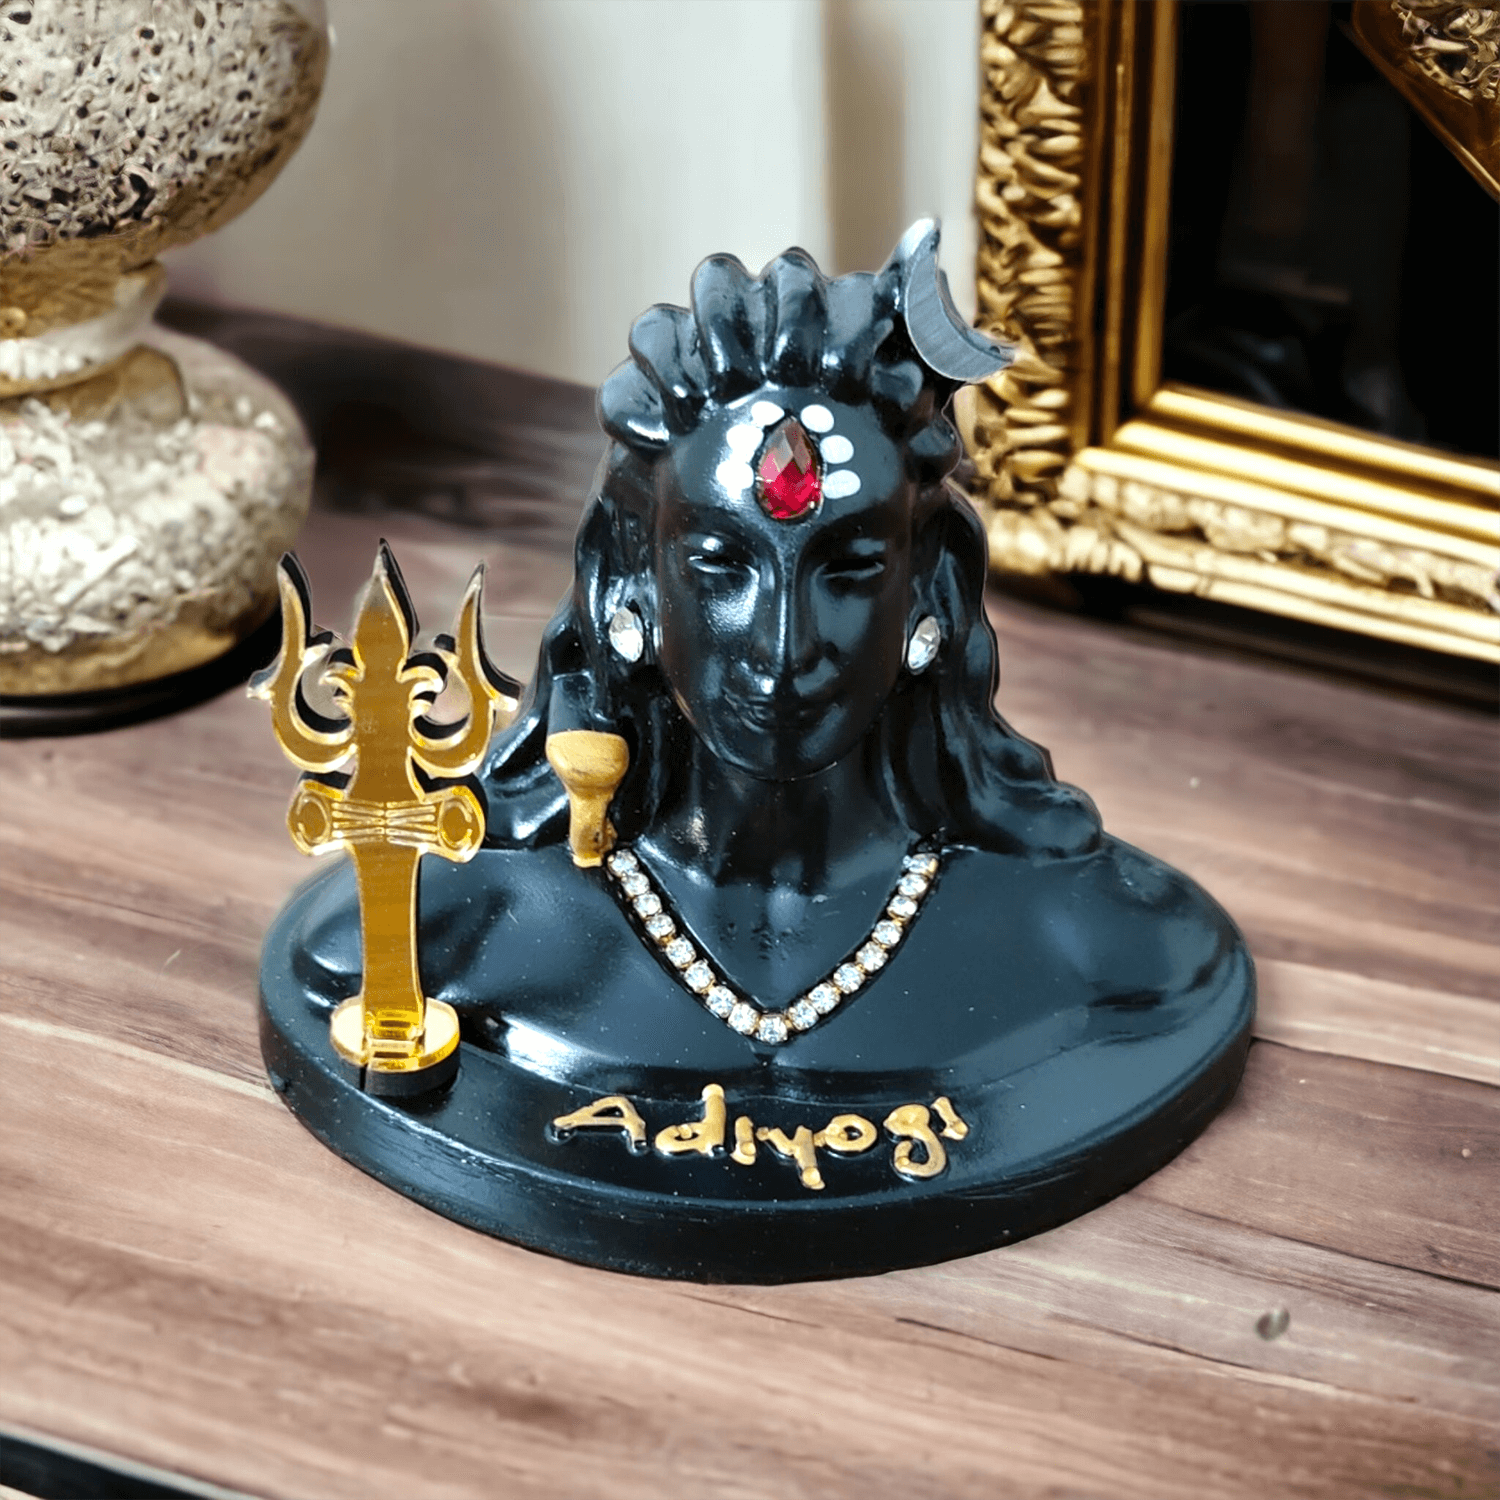 Buy Ganesha Idol for Car Dashboard | lord ganesha idols for car dashboard  gifts for girls boys husband wife mom dad Decorative Showpiece - 6 cm  (Ceramic, Multicolor) Online In India At Discounted Prices